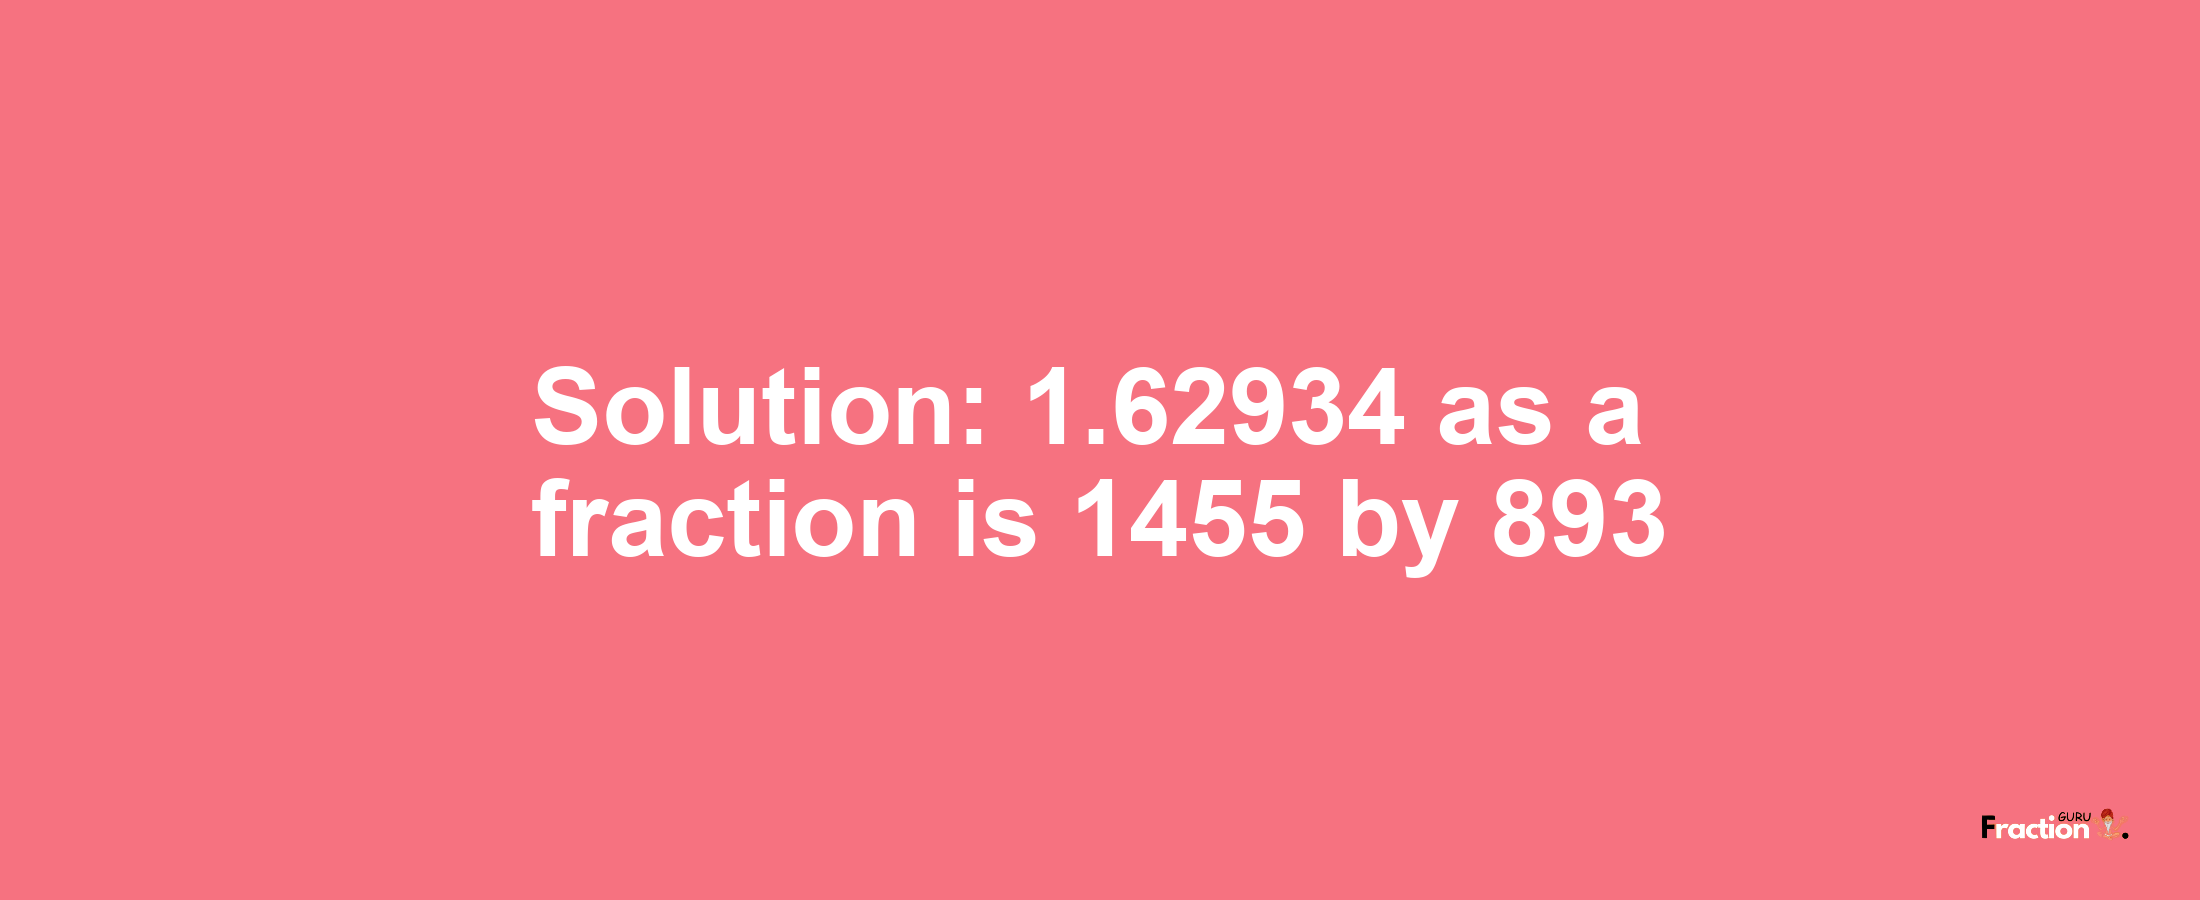 Solution:1.62934 as a fraction is 1455/893